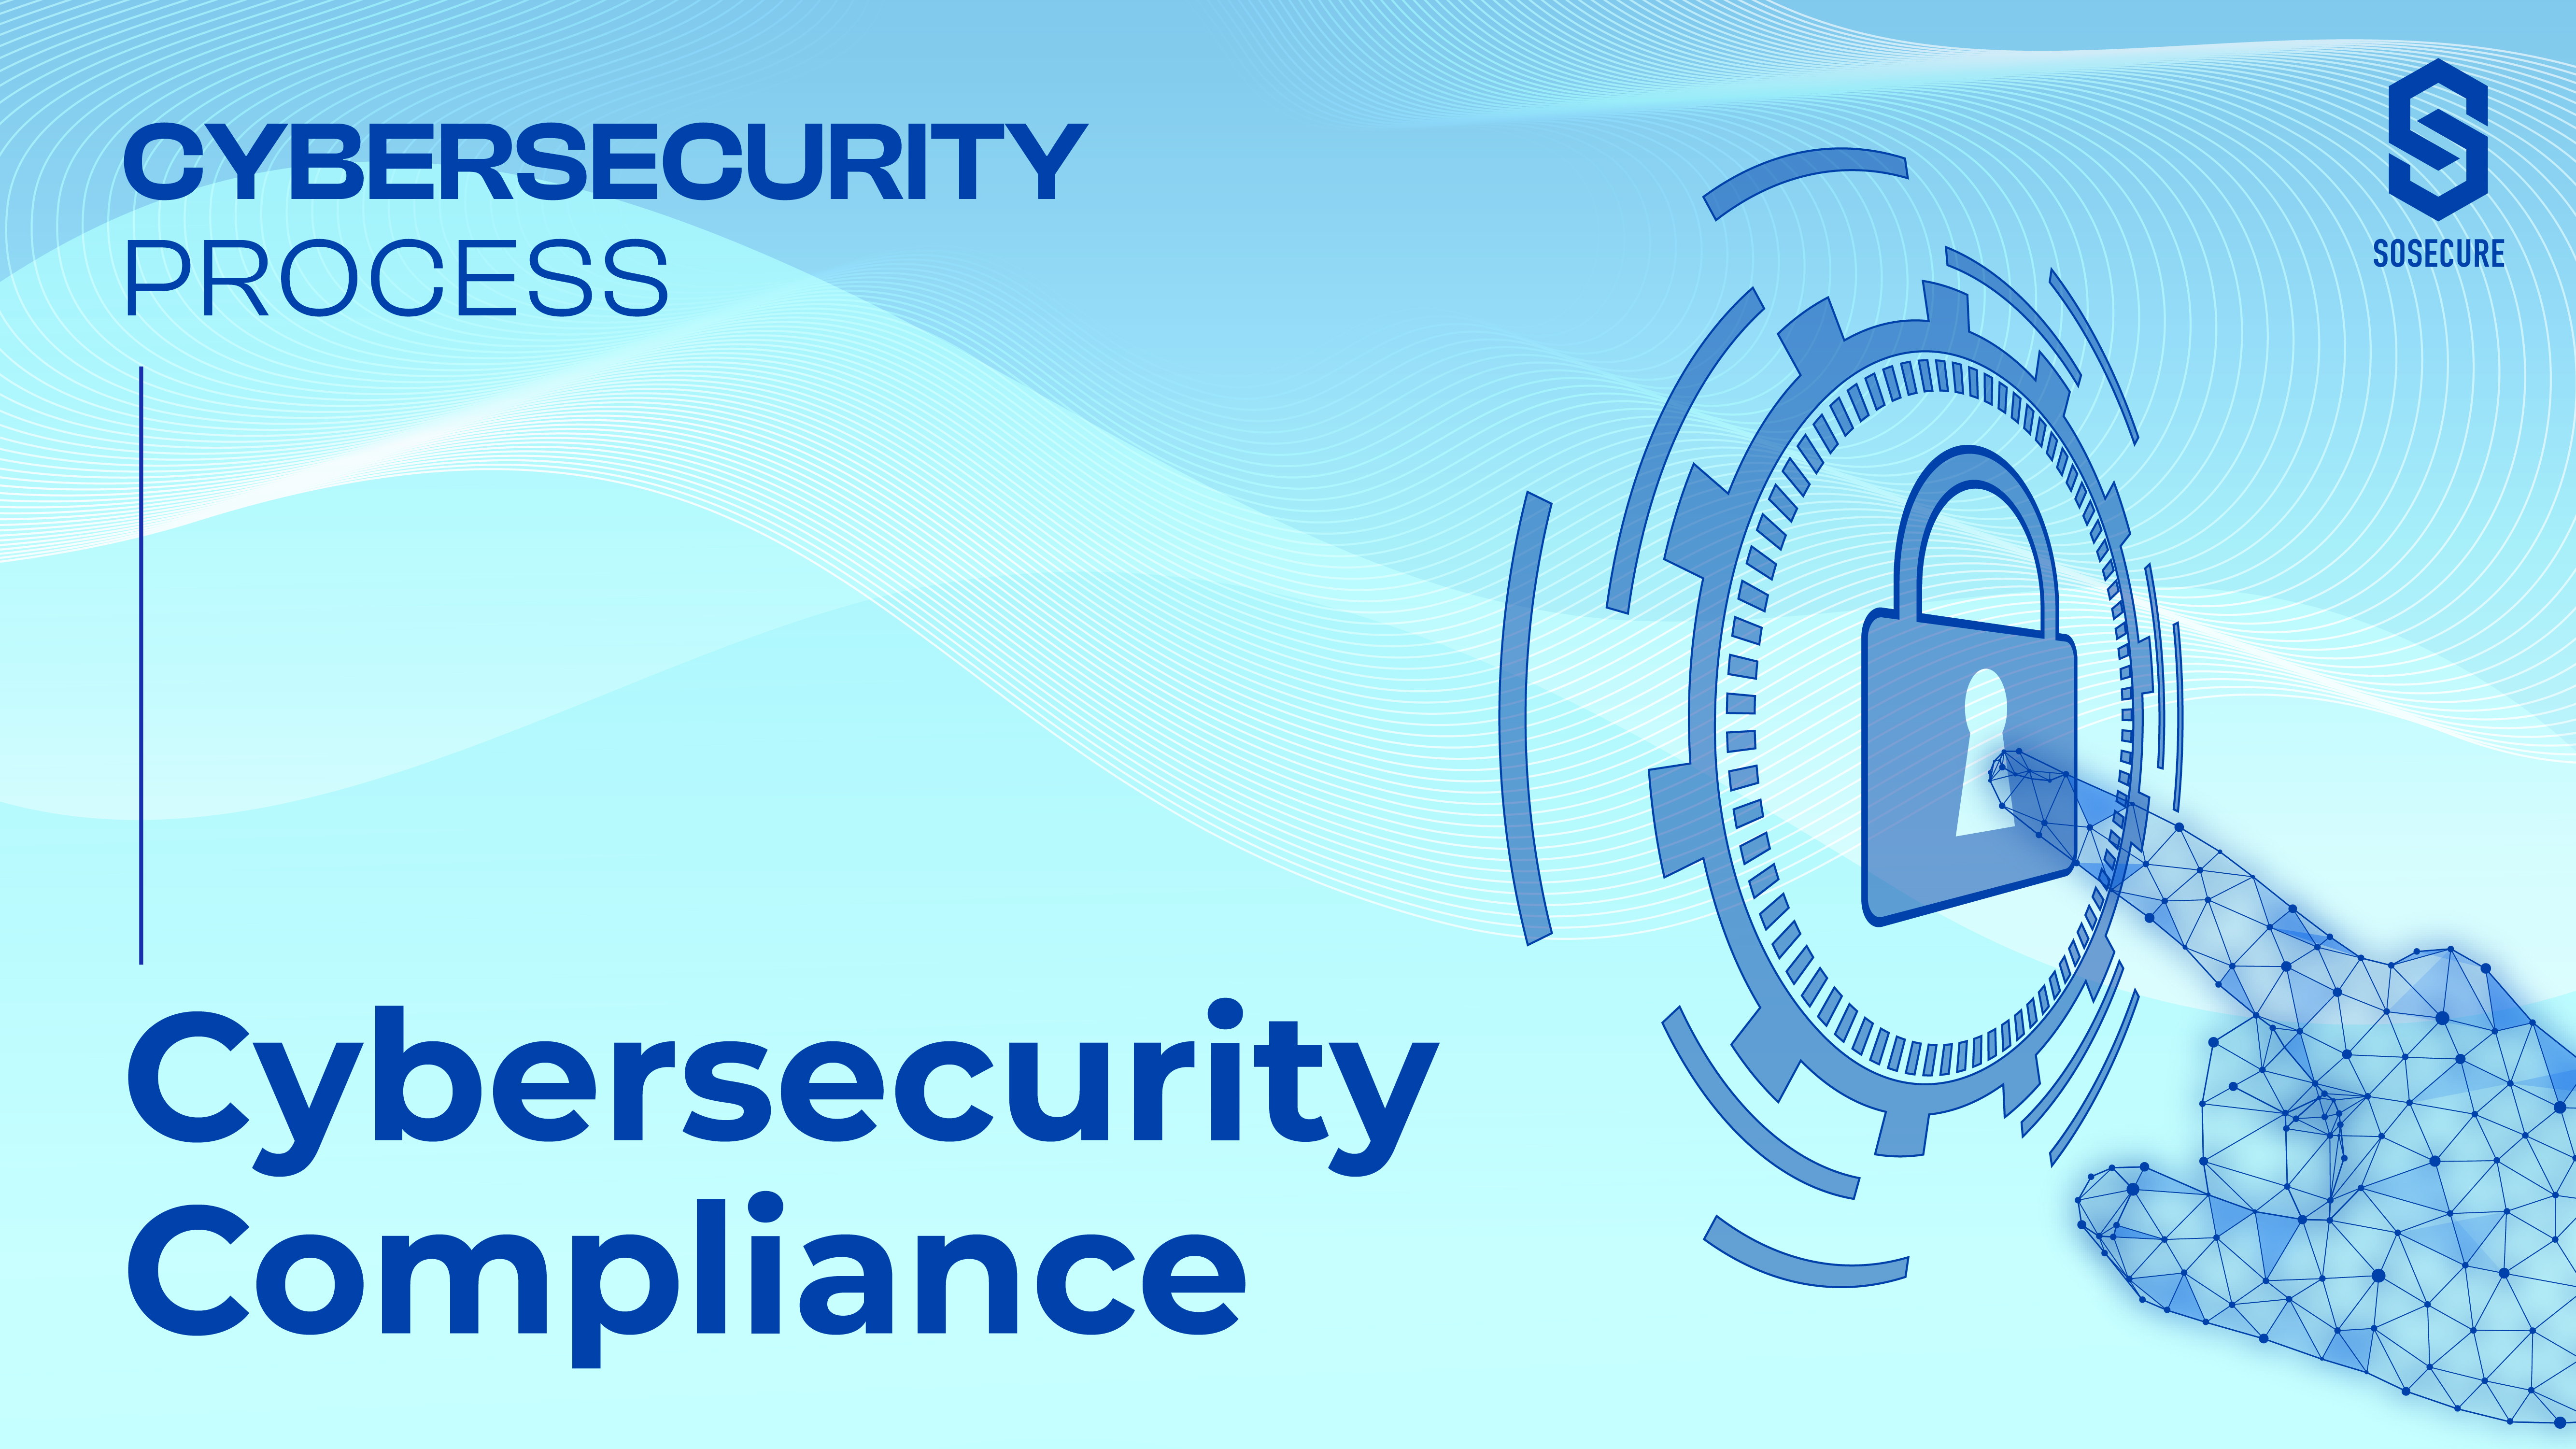 CYBERSECURITY COMPLIANCE | SOSECURE MORE THAN SECURE